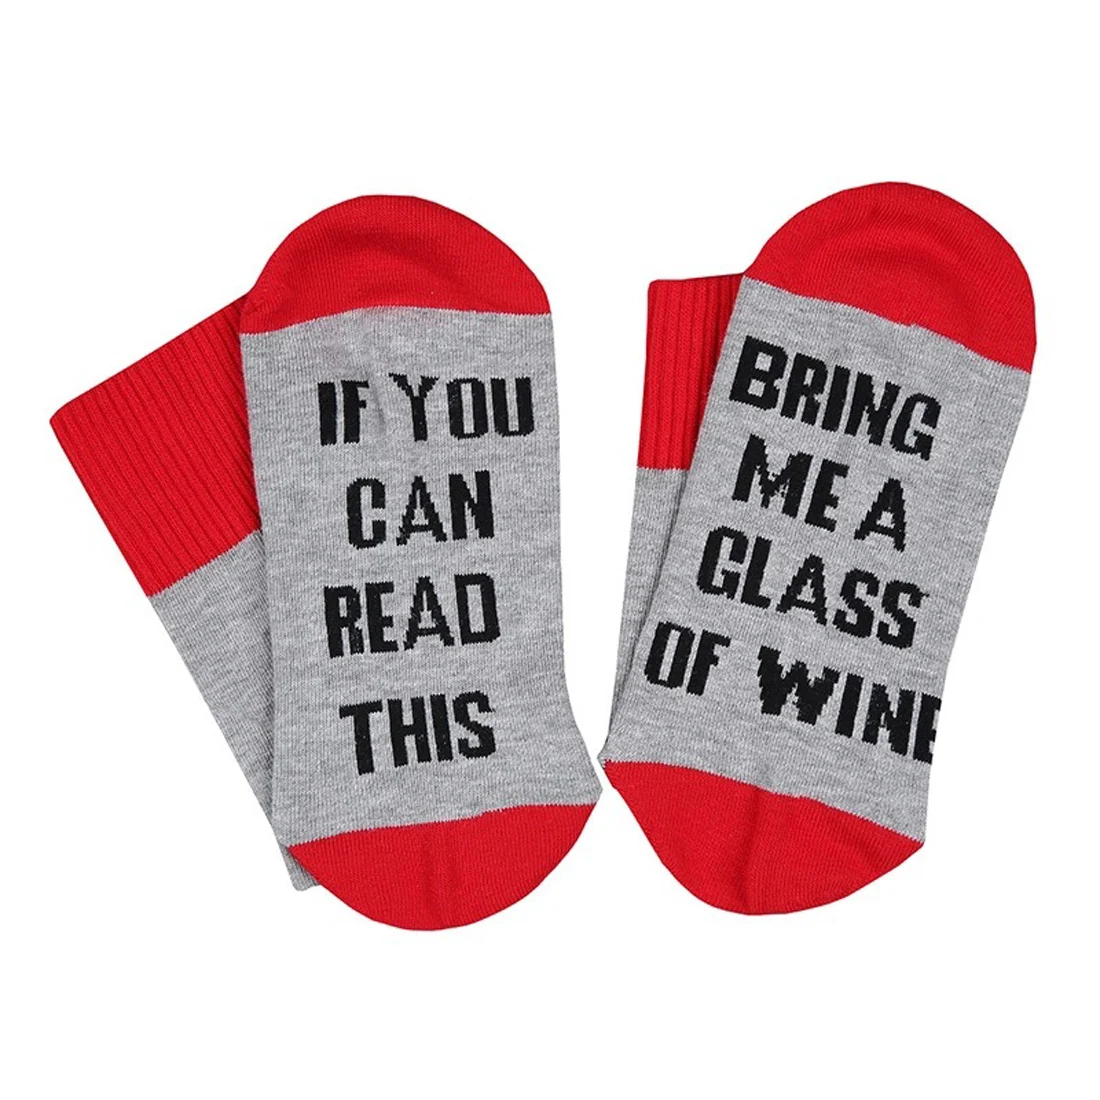 

Bring Me A Glass Of Wine Cotton Casual Socks Unisex Couple Socks 1 Pairs IF YOU CAN READ THIS Sock Women Men Funny Ankle Socks